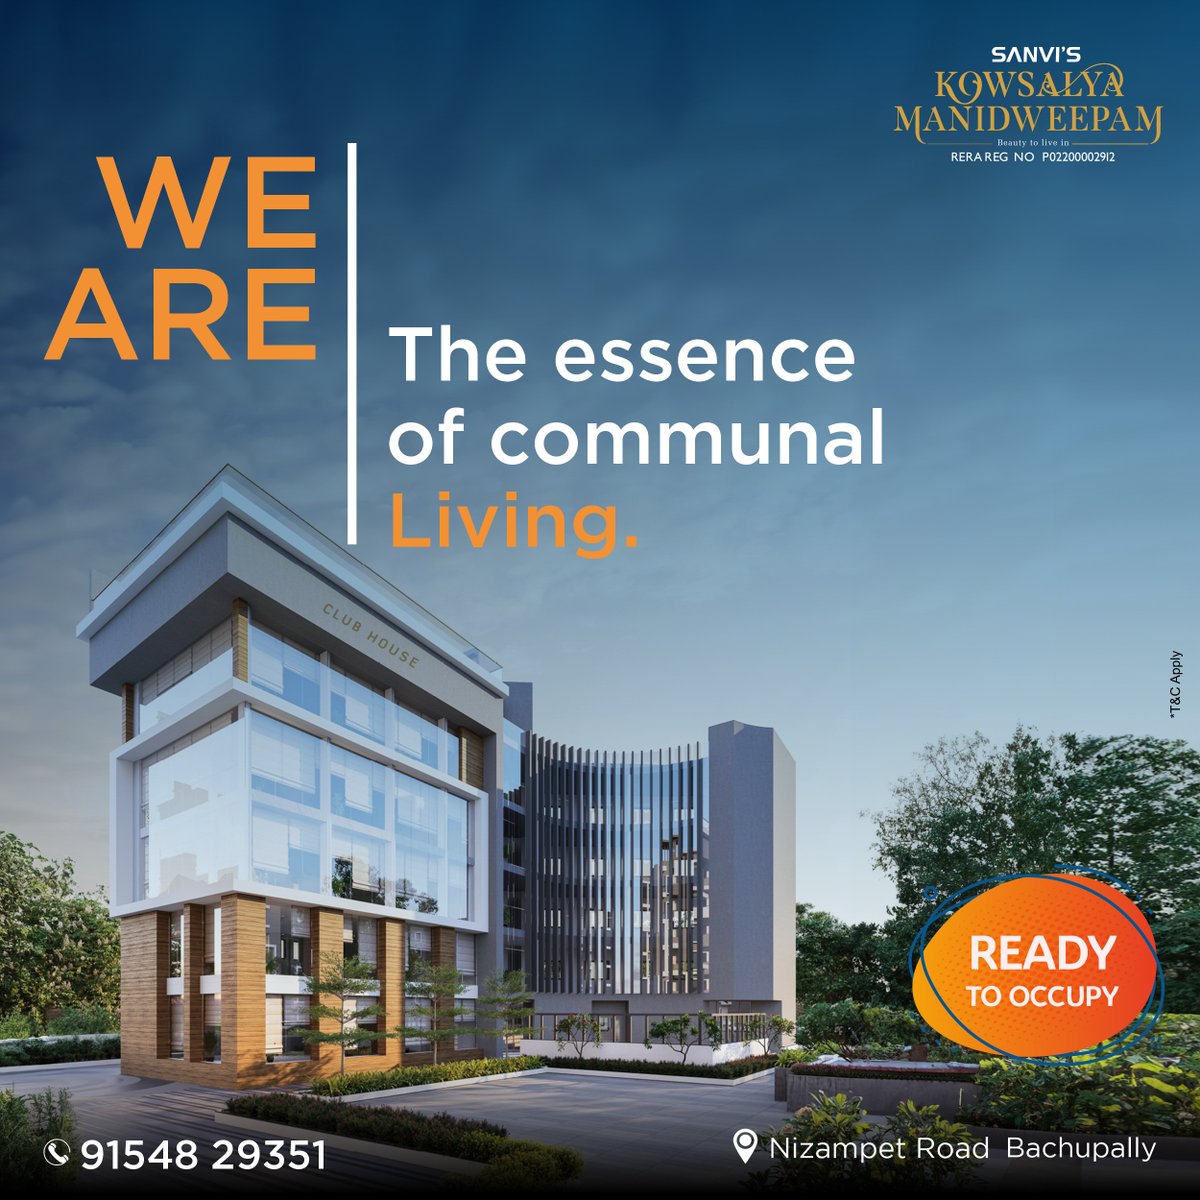 Neighbours like friends. Bonds like a family. At Kowsalya Manedweepam, we build a community with a lifestyle, so you never feel alone.
#sanviinfra #kowsalyamanidweepam #Nizampet #Bachupally #home  #property #2and3bhkflats #2and3BHKApartments #2BHKApartments #3bhkapartments